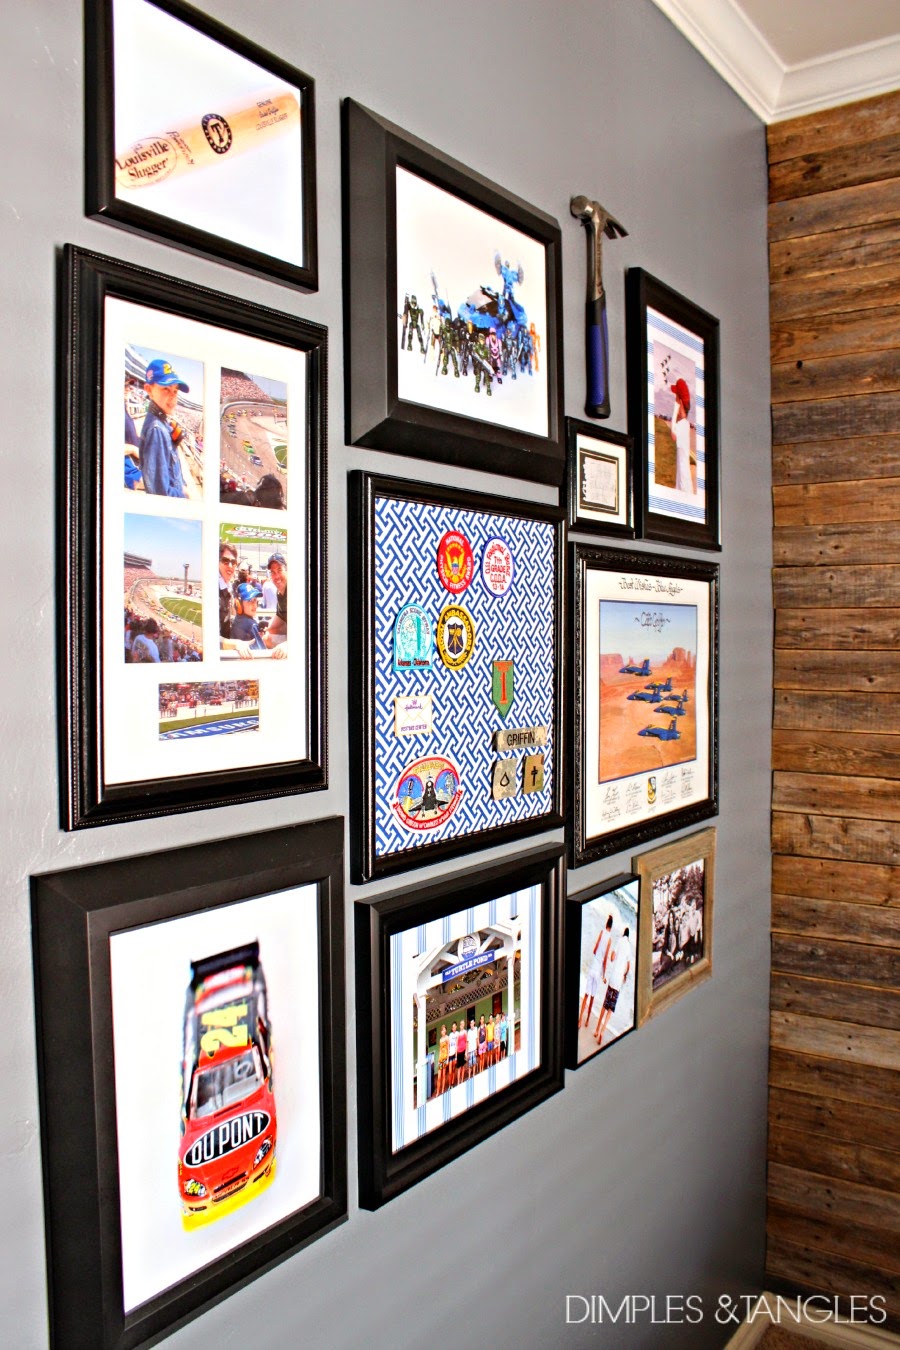 BOY'S GALLERY WALL AND SOUVENIR PATCH ARTWORK